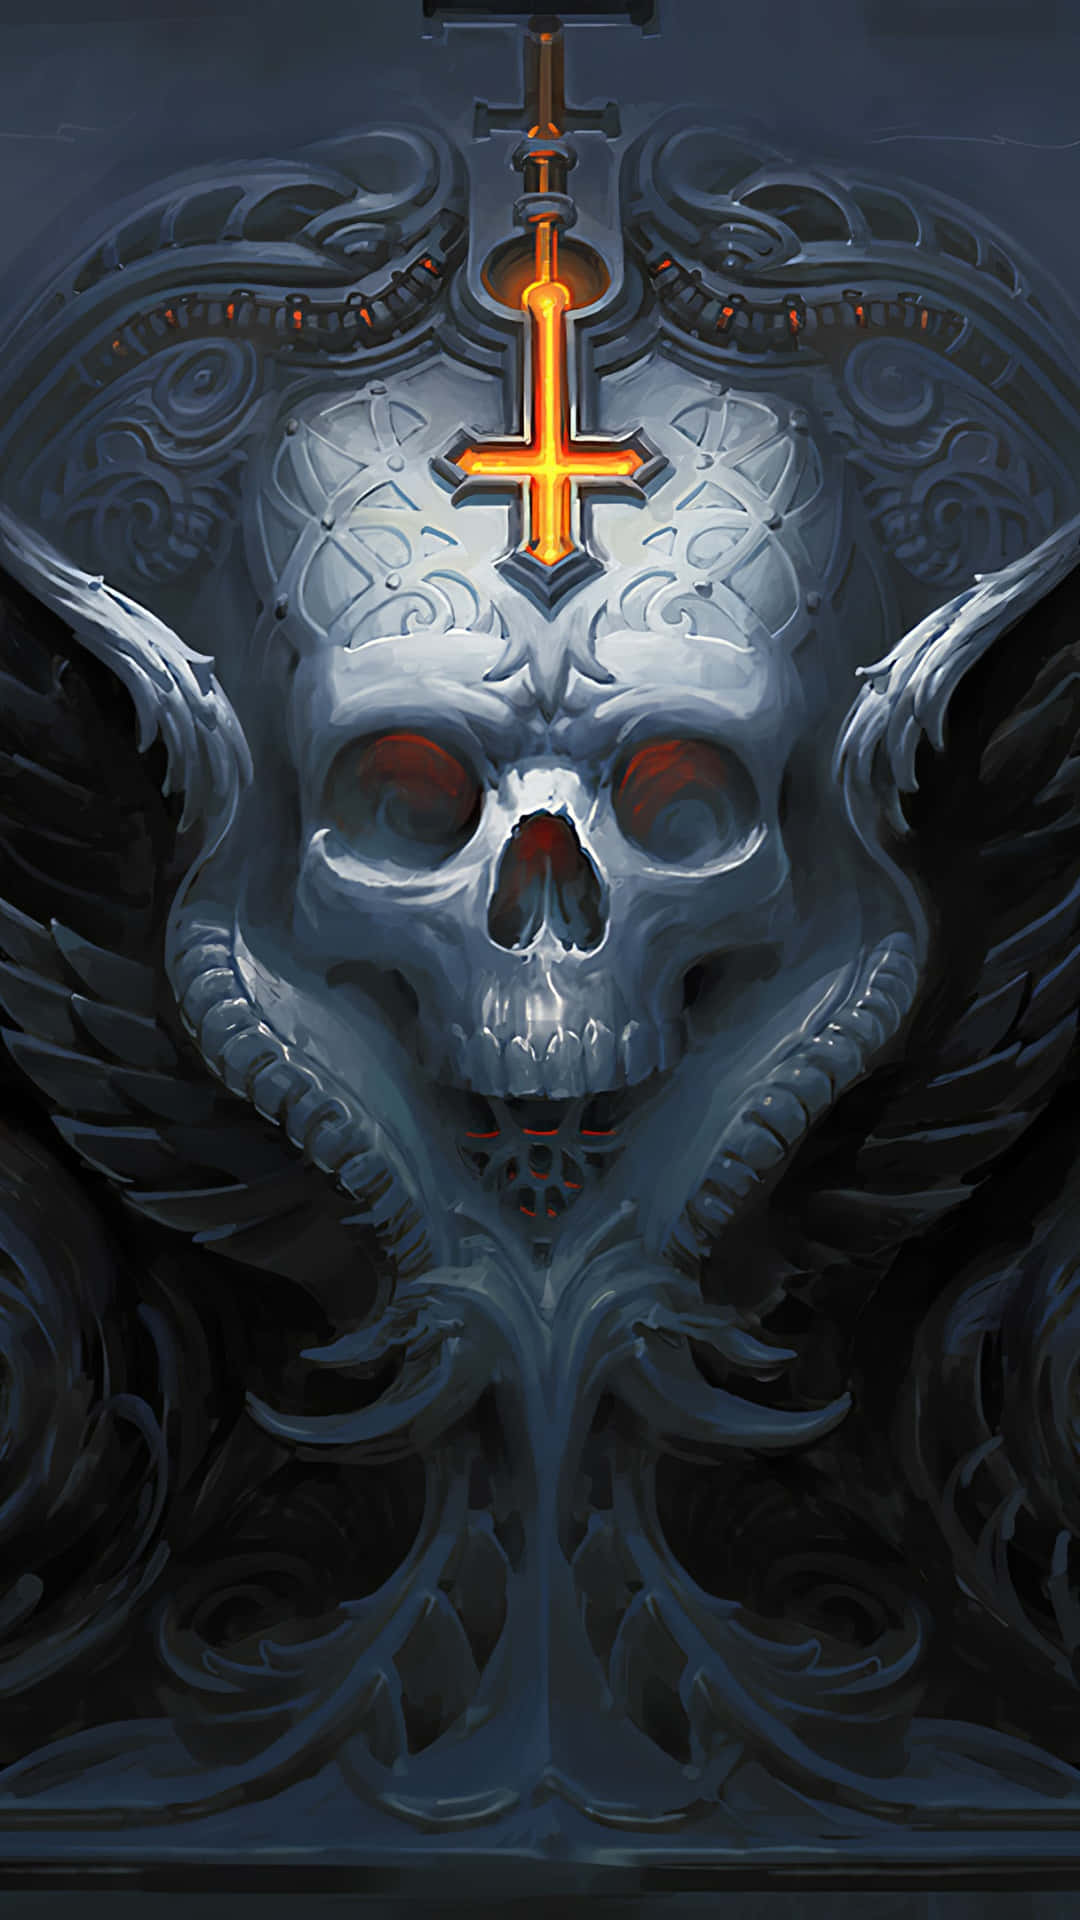 Skull And Crossbones With Gold Cross Background